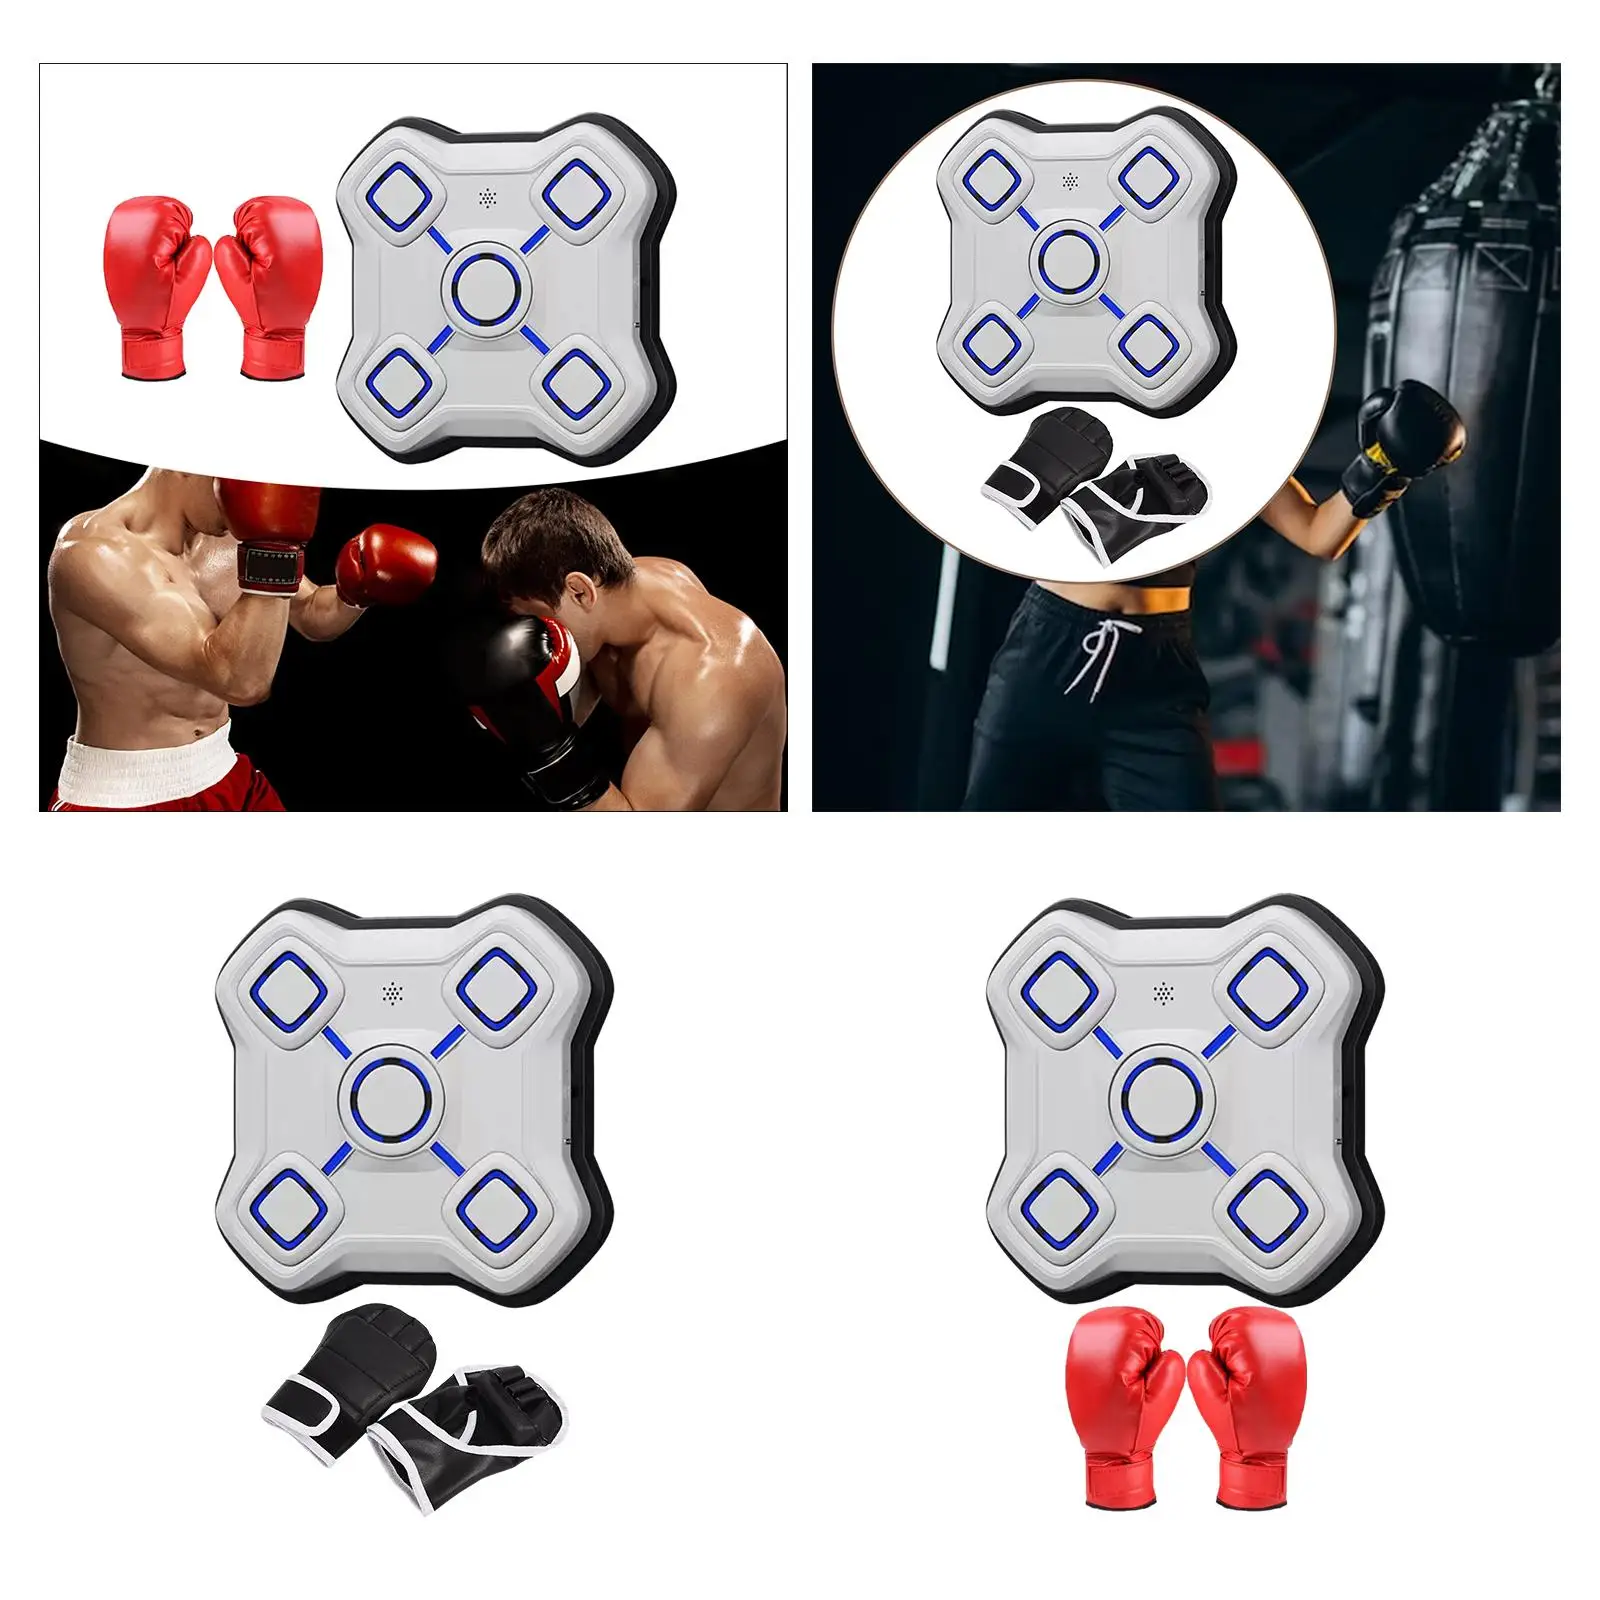 Music Boxing Machine Boxing Trainer Electronic Music Boxing Wall Target for Workout Agility Reaction Exercise Response Training